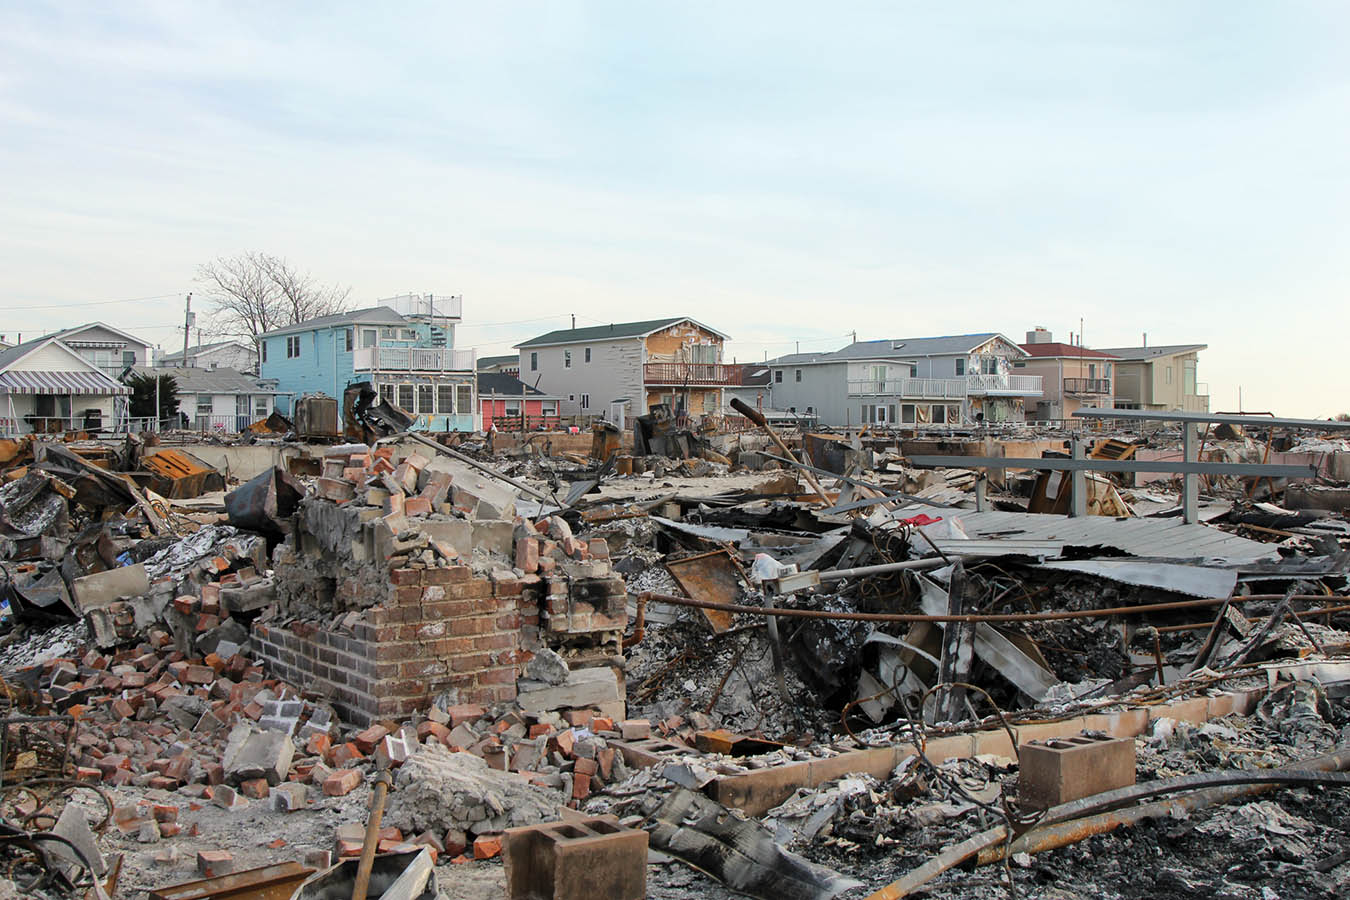 After the storm: The neighborhood of Breezy Point, New York, was especially hard hit. Photo Credit: Leonard Zhukovsky